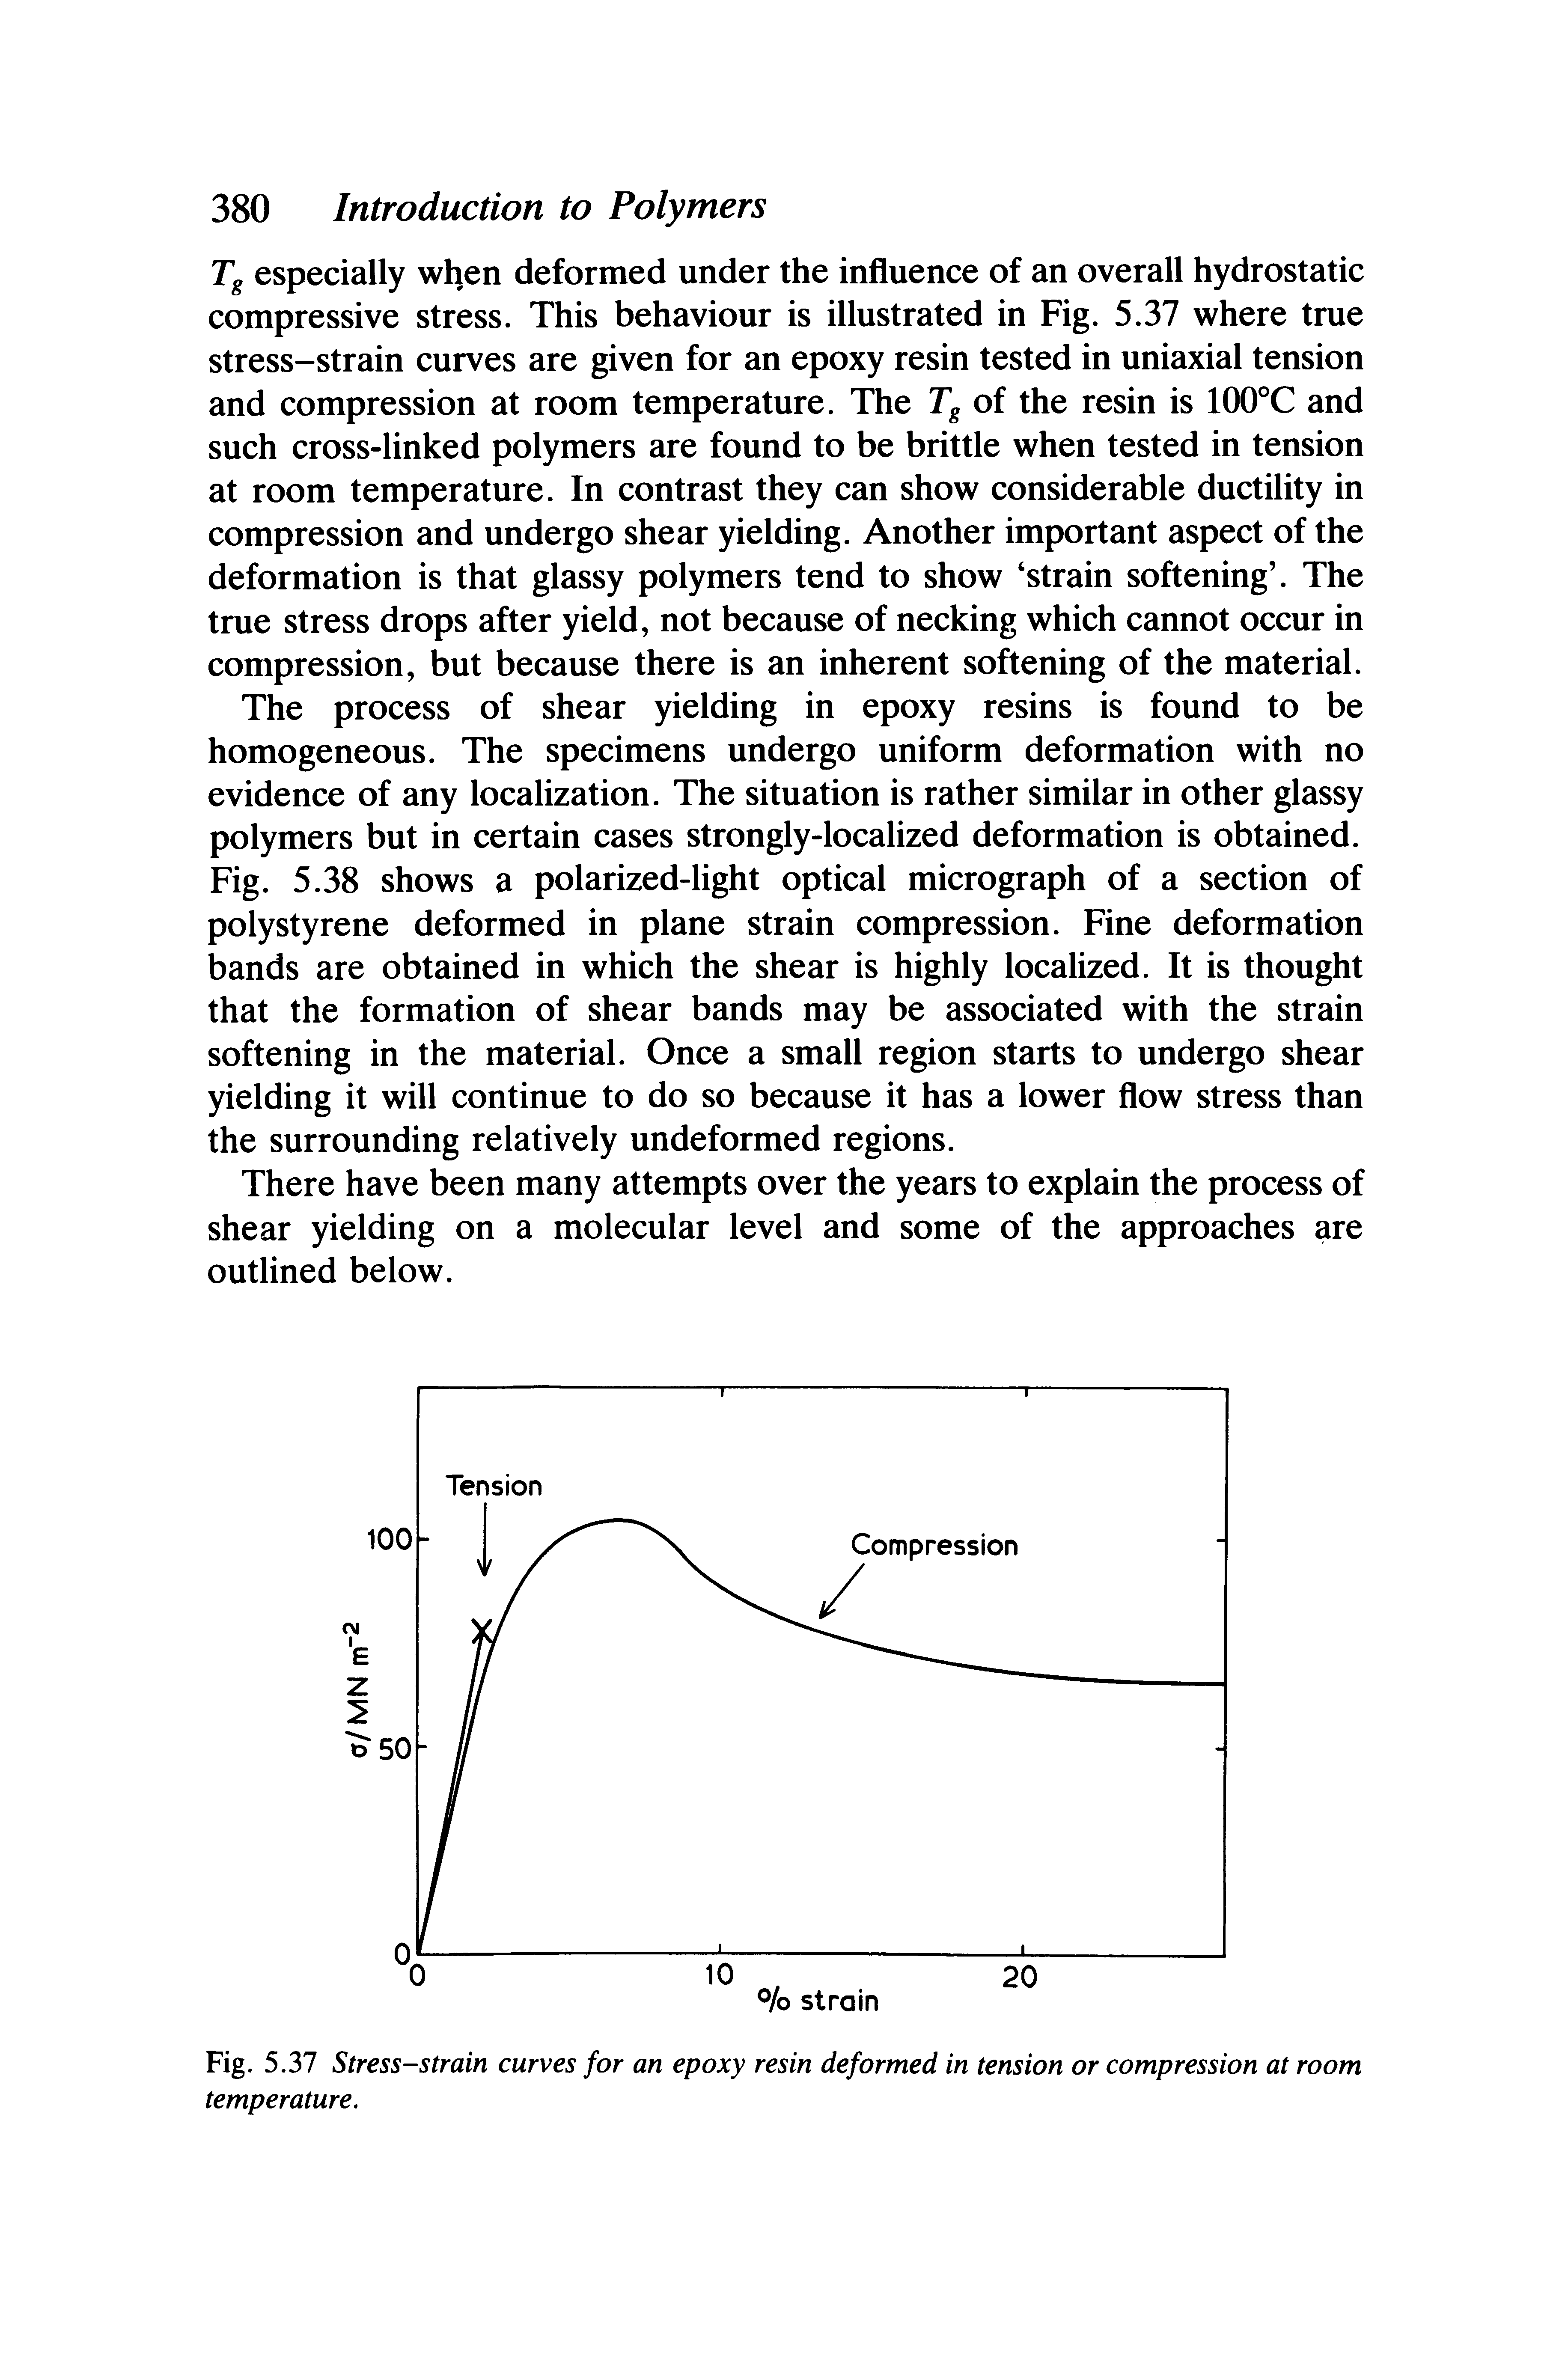 Fig. 5.37 Stress-strain curves for an epoxy resin deformed in tension or compression at room temperature.